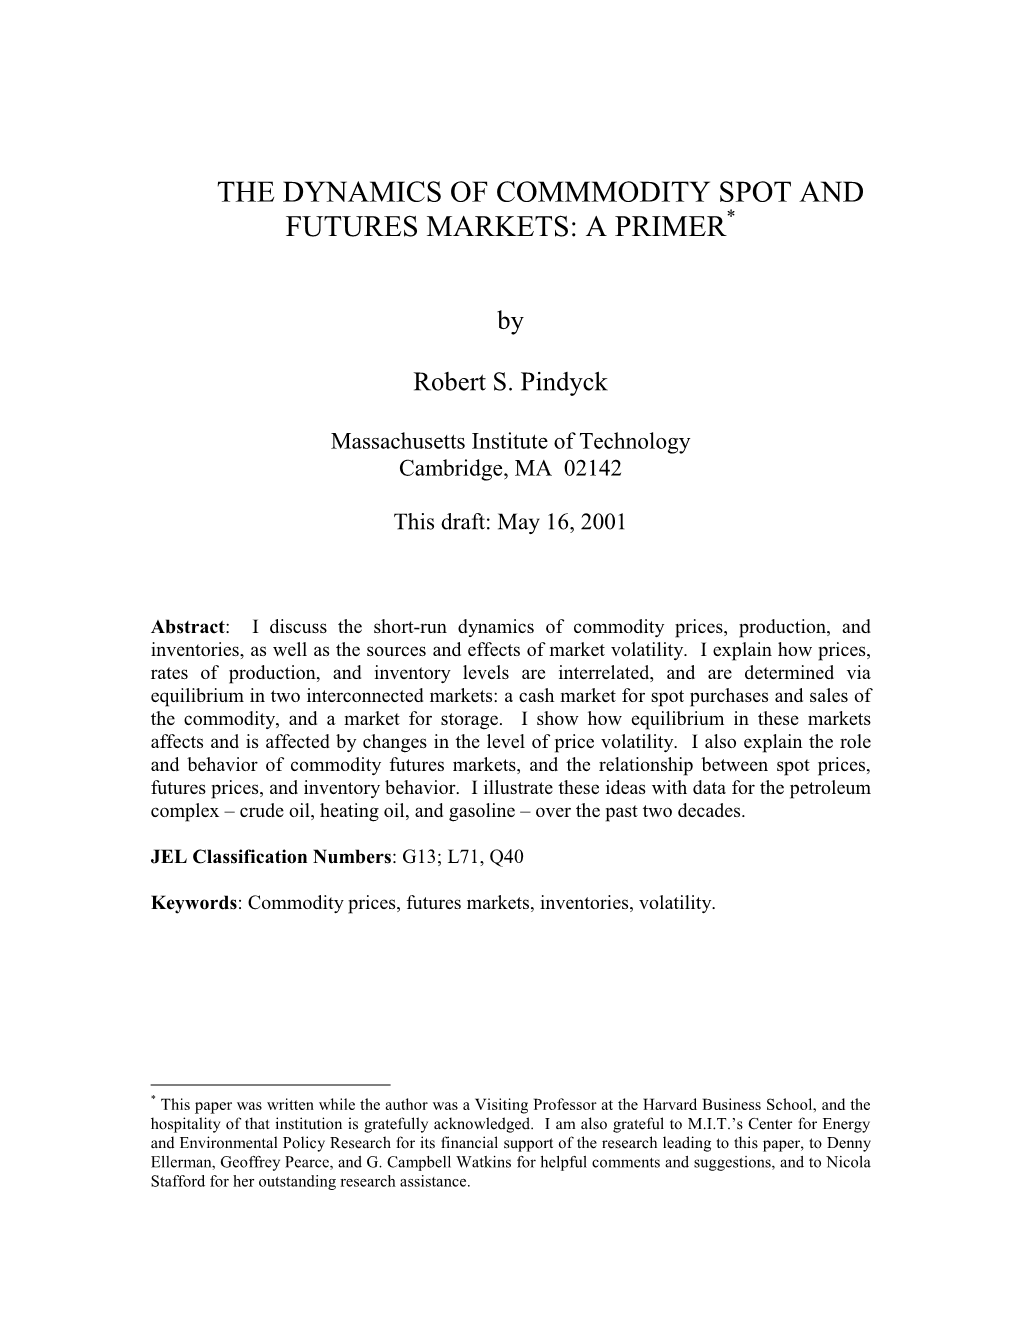 The Dynamics of Commmodity Spot and Futures Markets: a Primer*